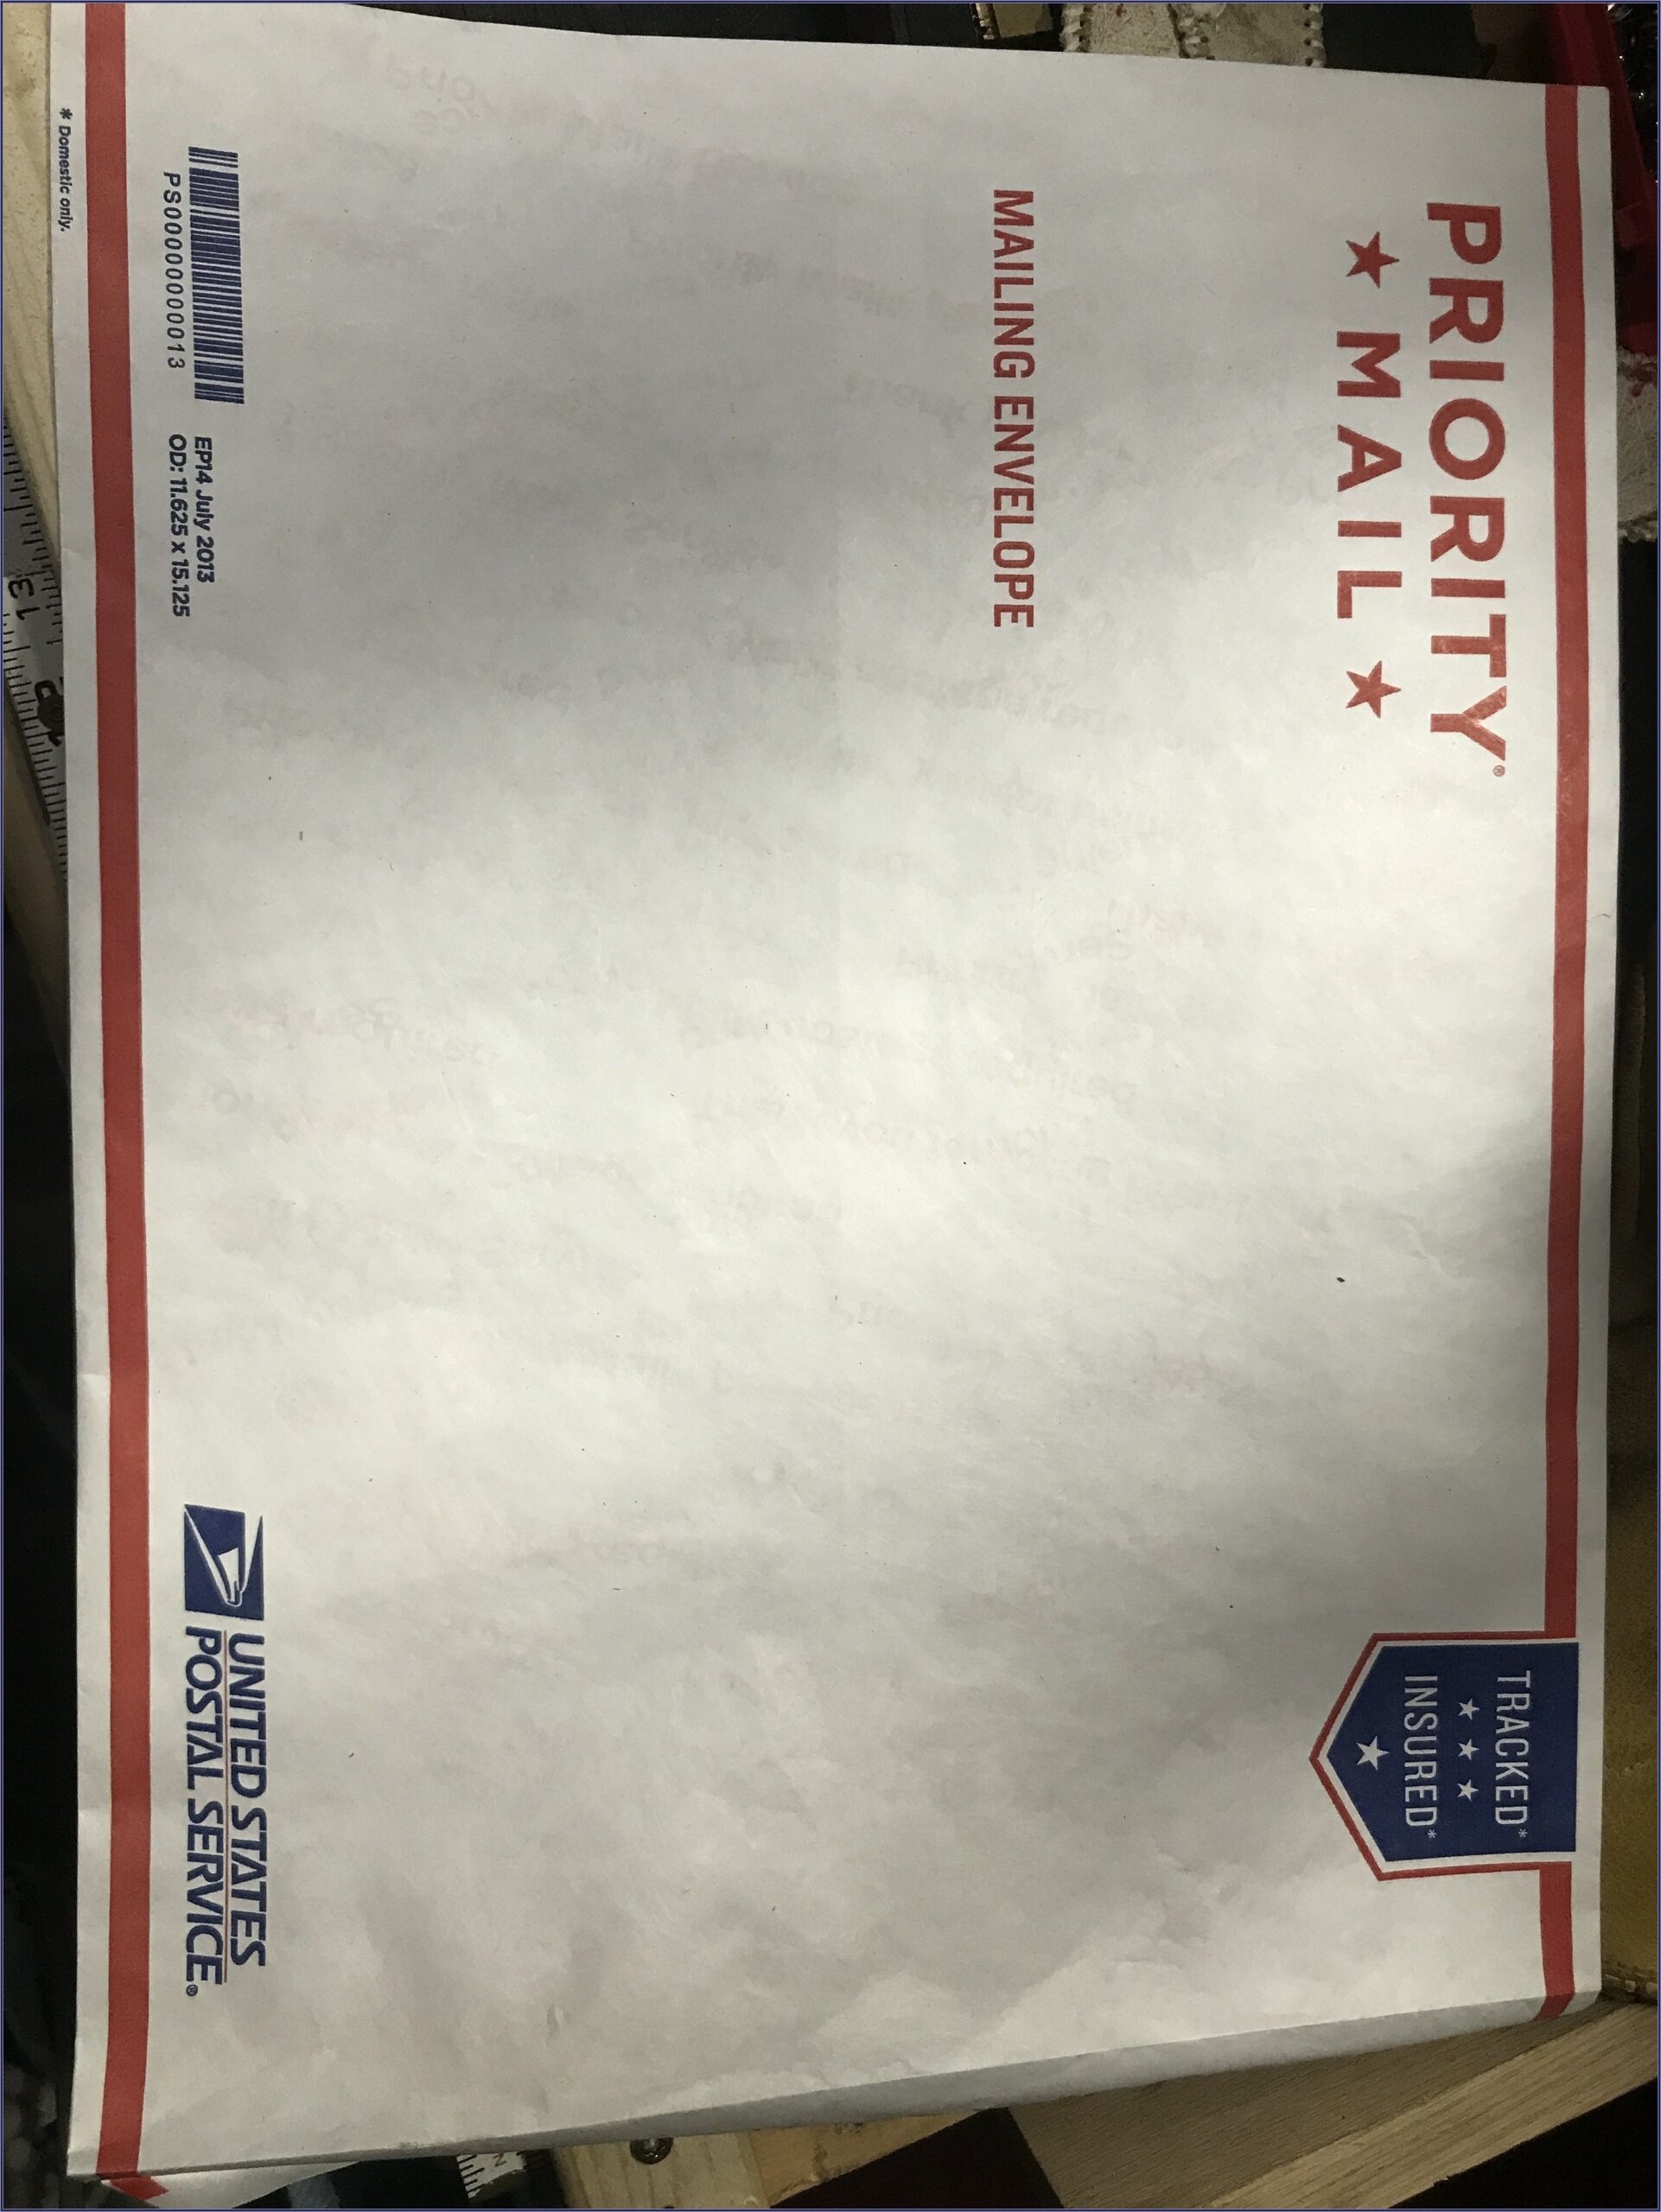 Priority Mail Padded Envelope Dimensions